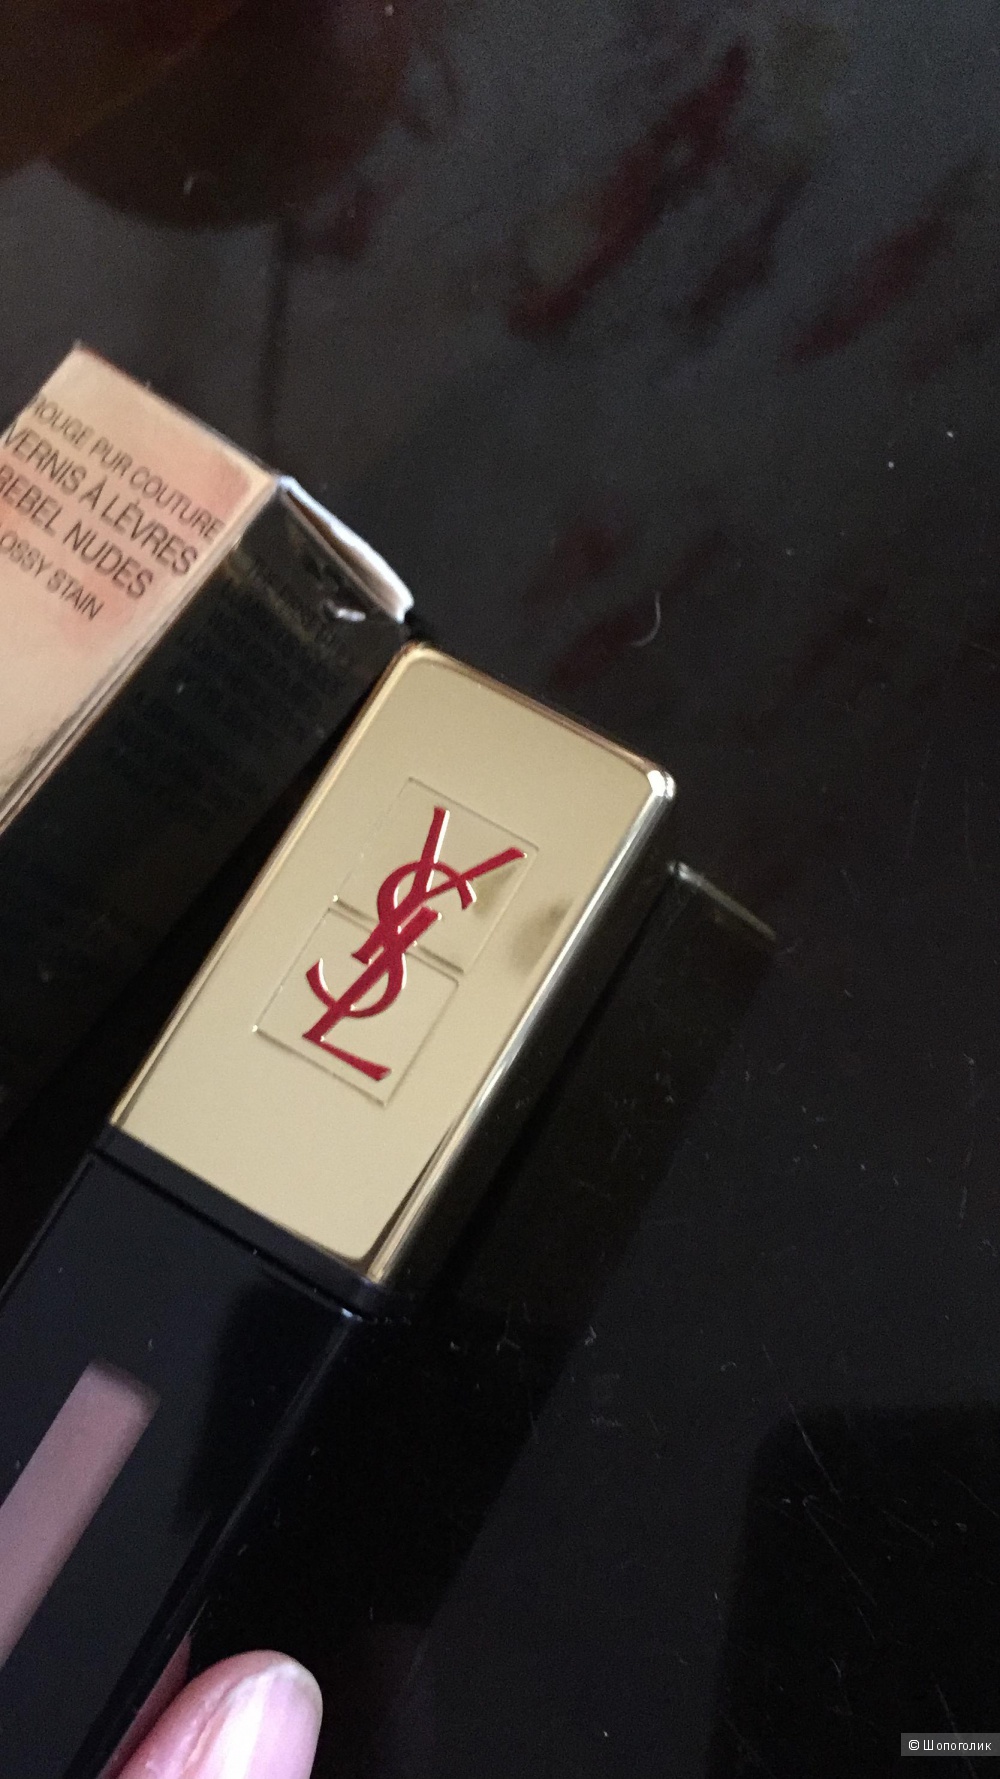 YSL ЛАК ДЛЯ ГУБ ROUGE PUR COUTURE VERNIS A LEVRES GLOSSY STAIN